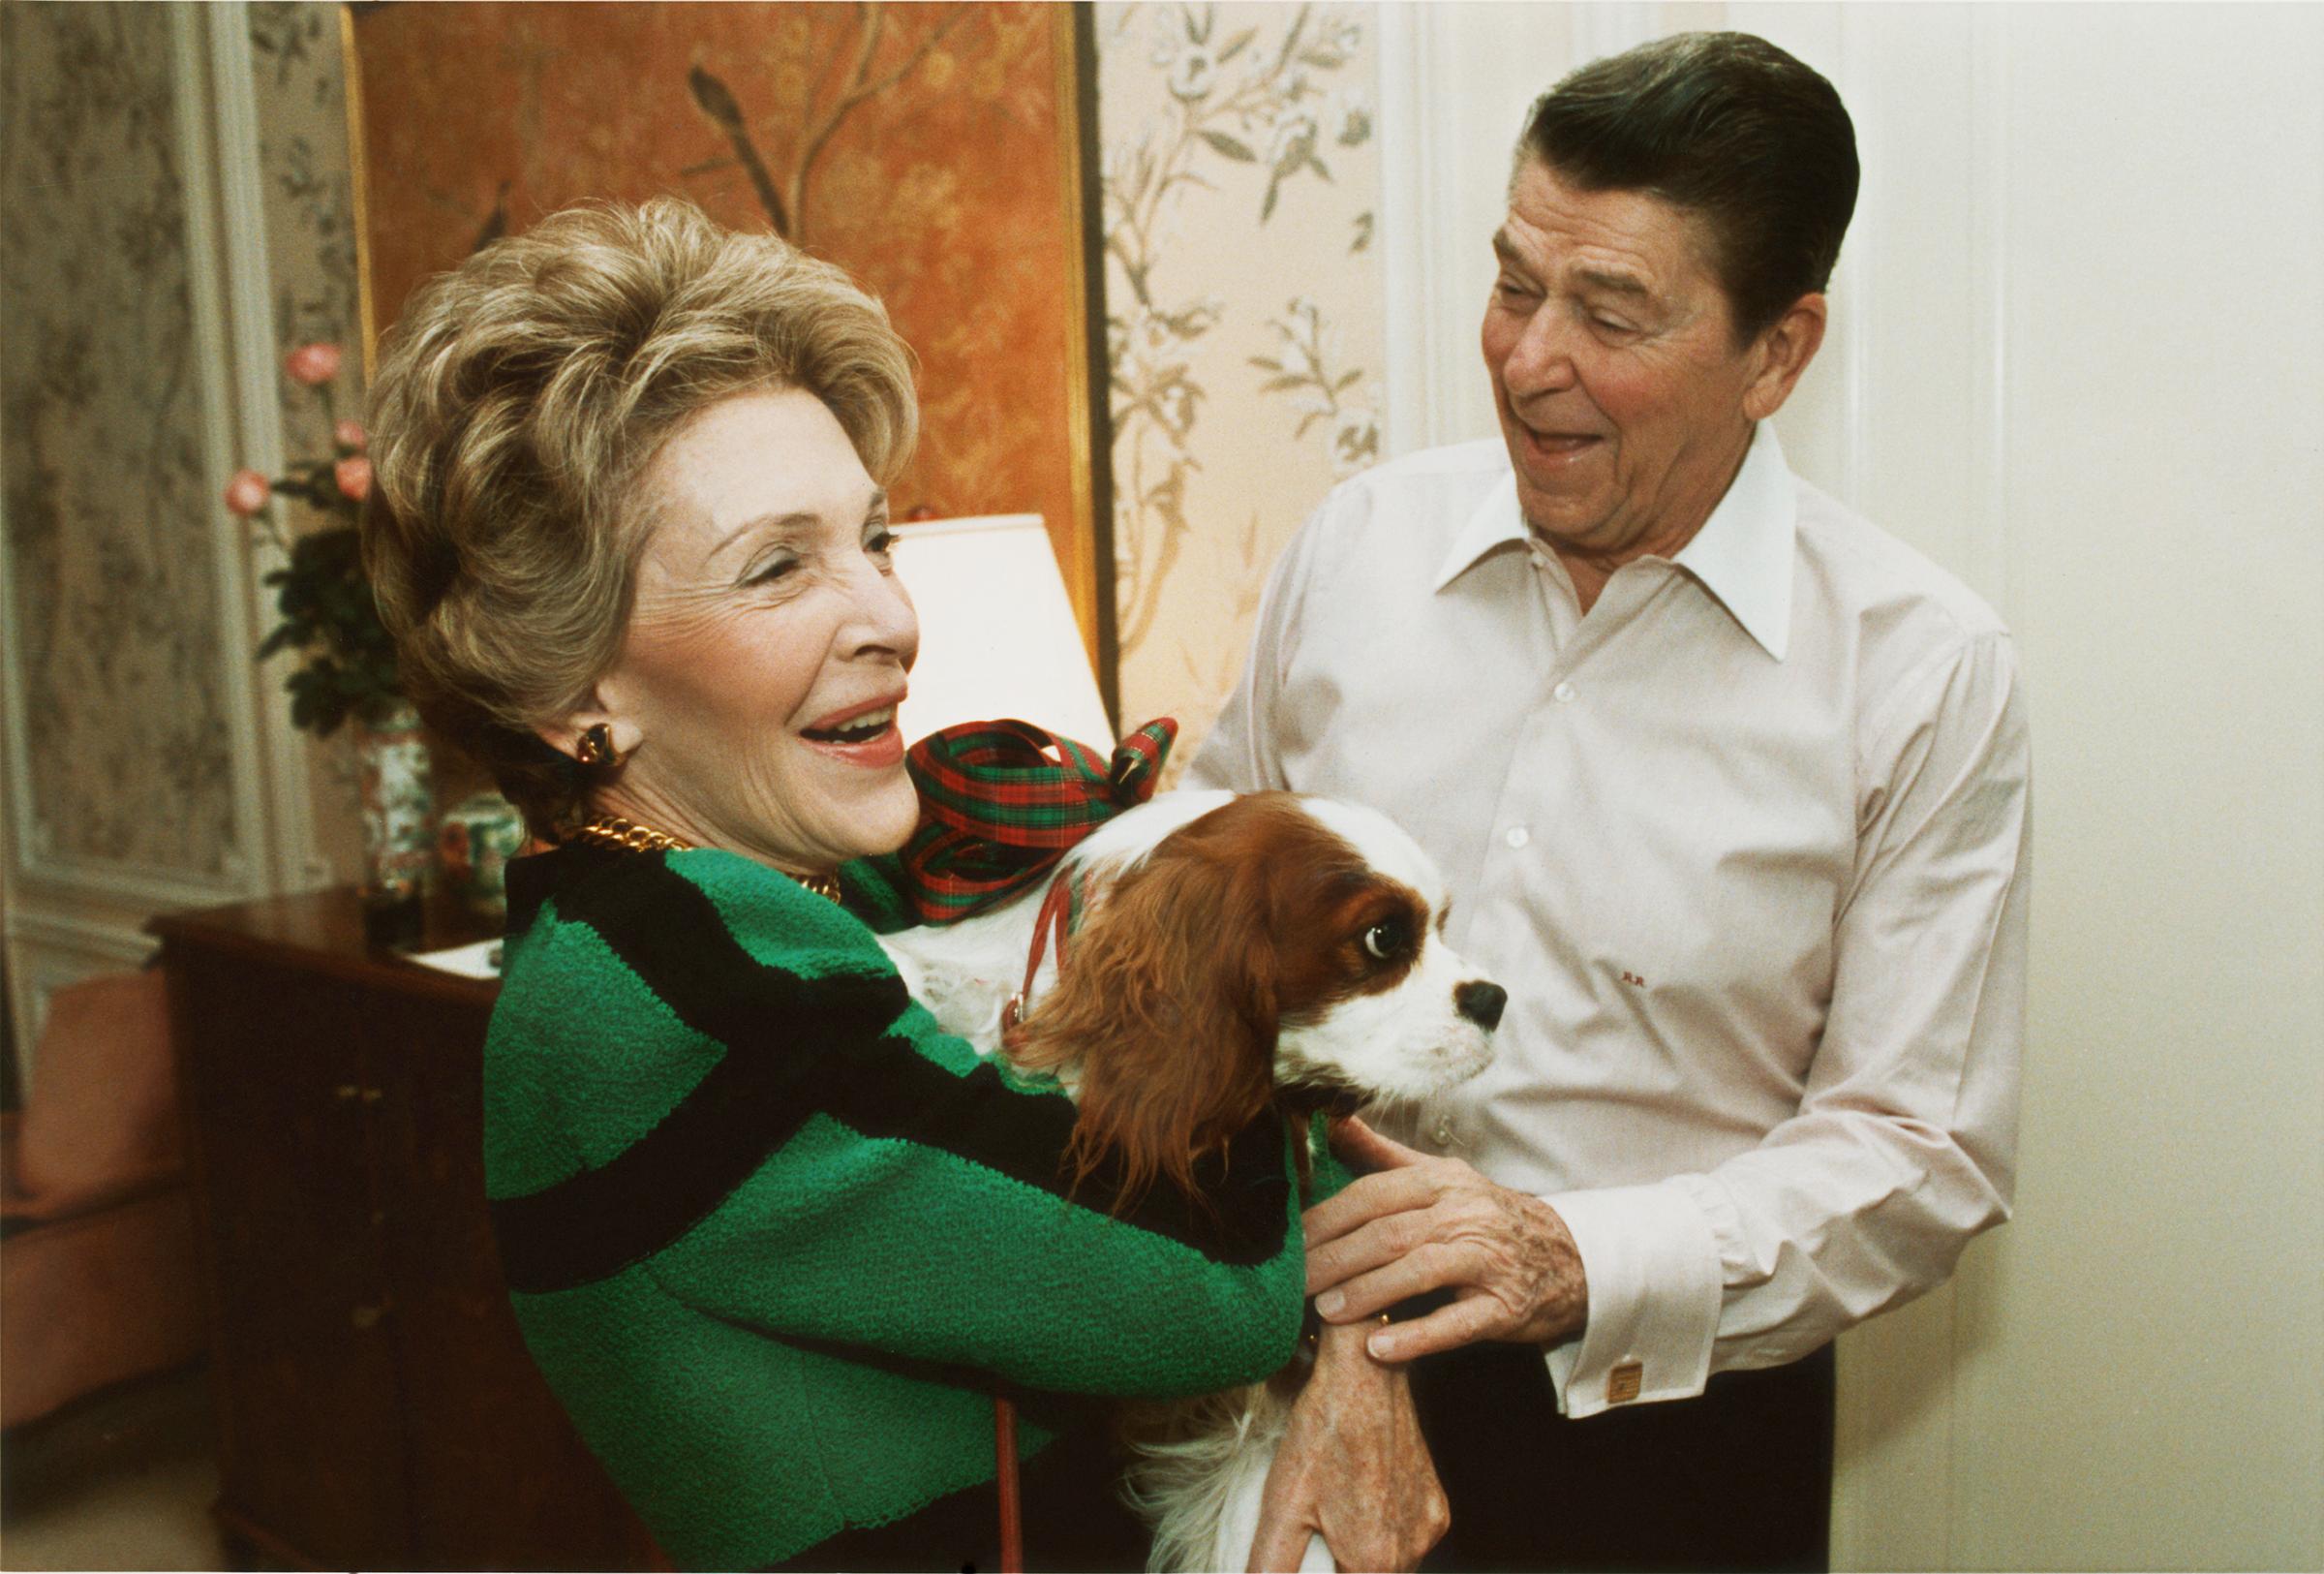 Ronald Reagan presents First Lady, Nancy Reagan, with an early Christmas present of a King Charles Spaniel named Rex, at their suite in a New York City hotel, Dec. 6, 1985.